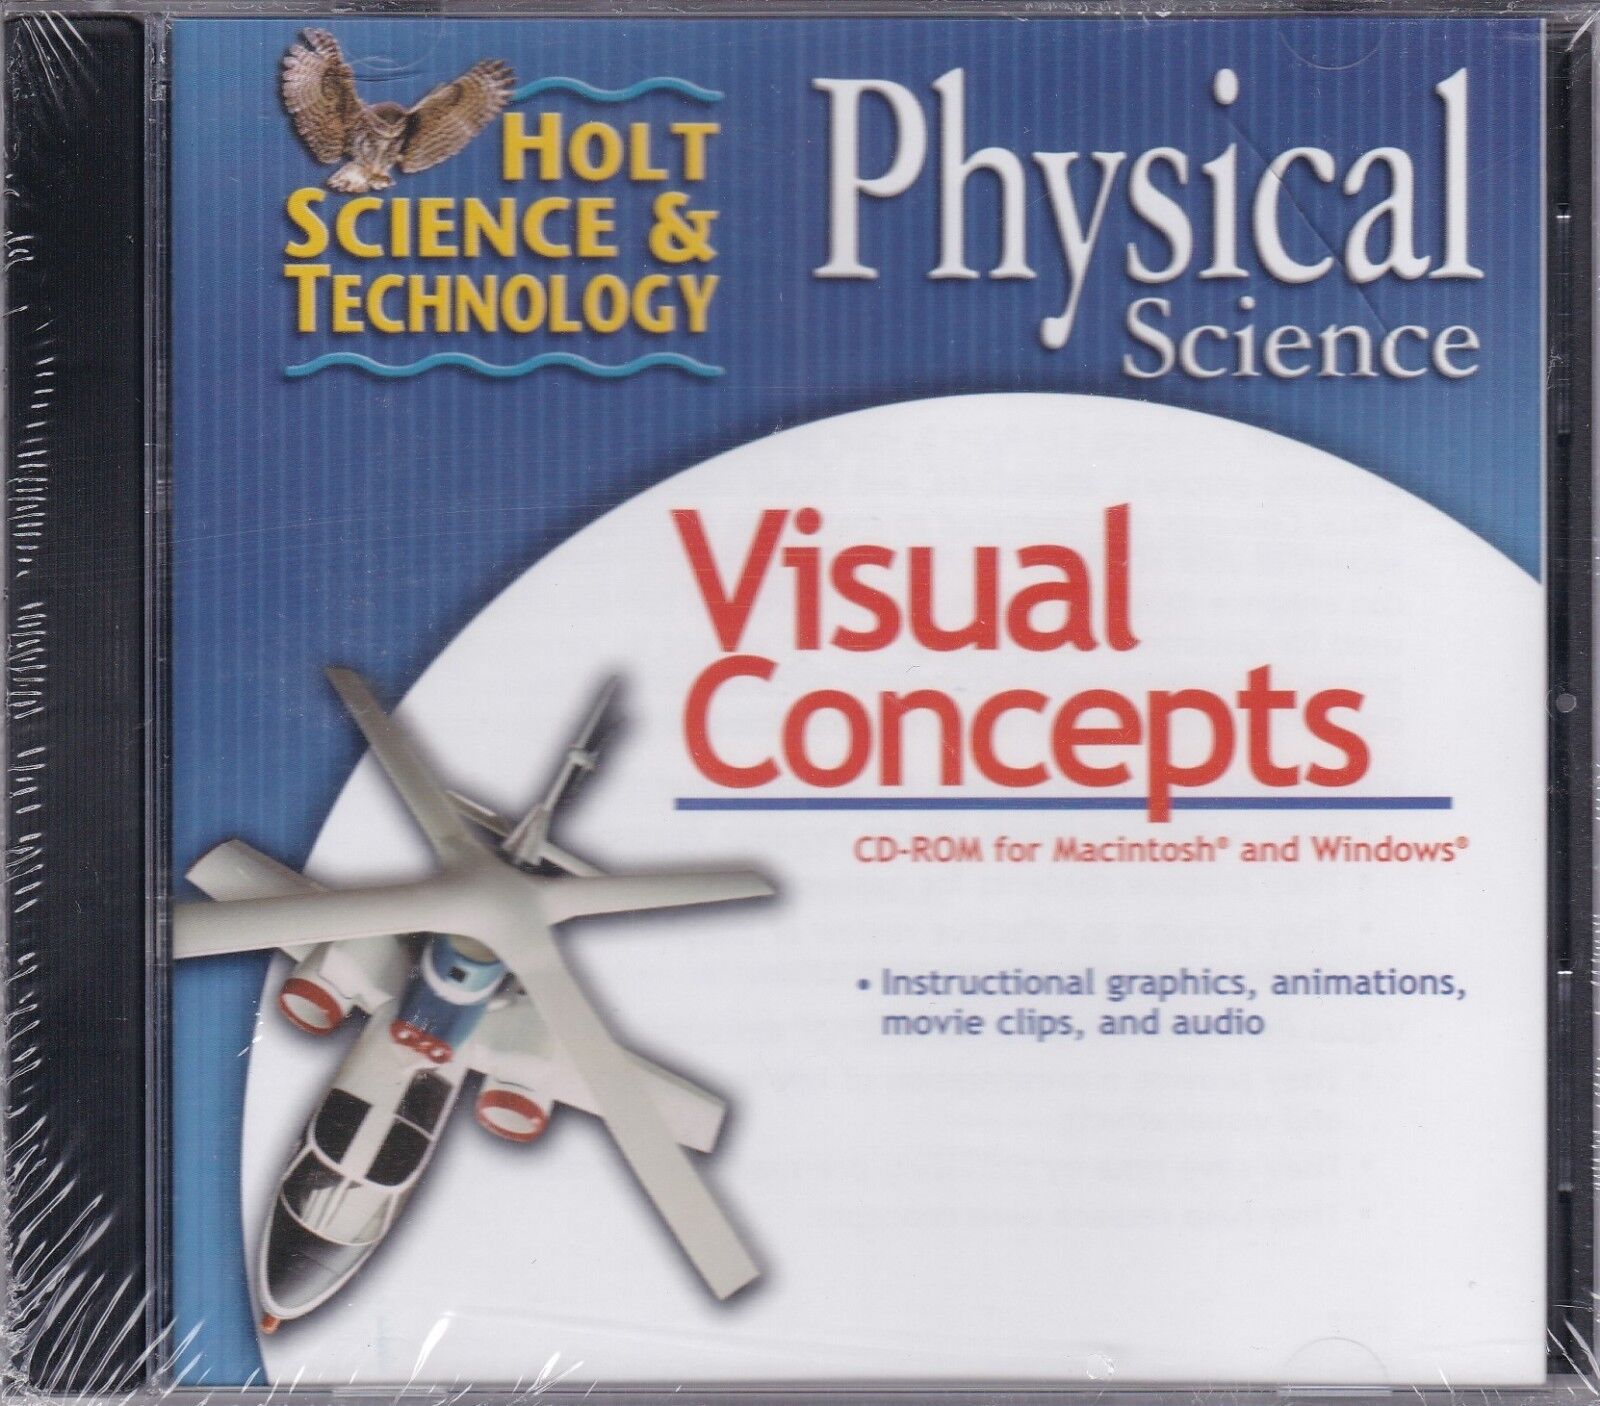 Holt Science & Technology Physical Science Visual Concepts PC CD-ROM **NEW**